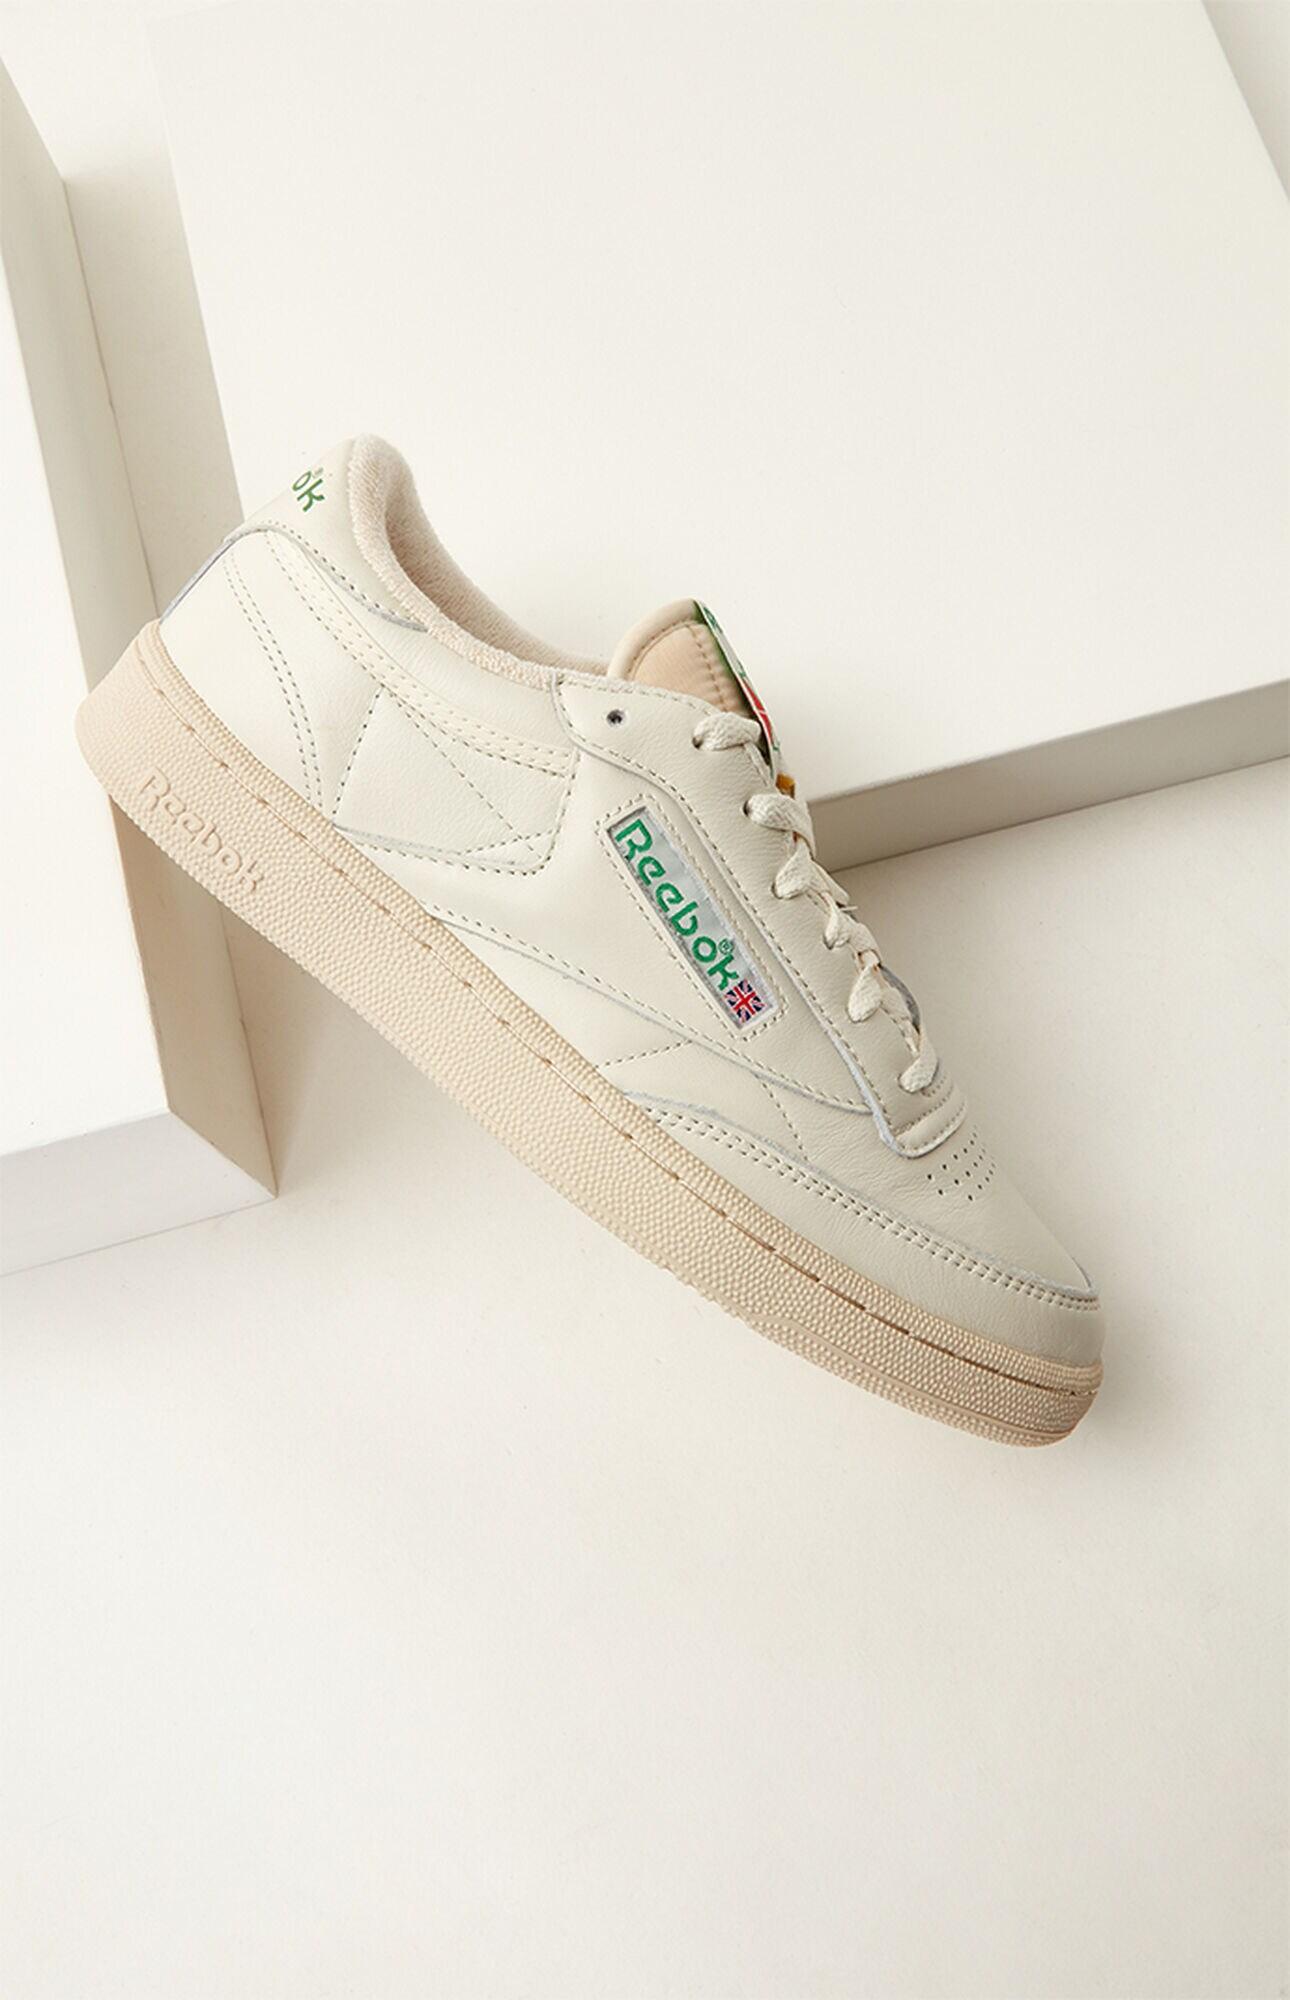 Reebok Leather Off White Club C 85 Vintage Shoes for Men - Lyst